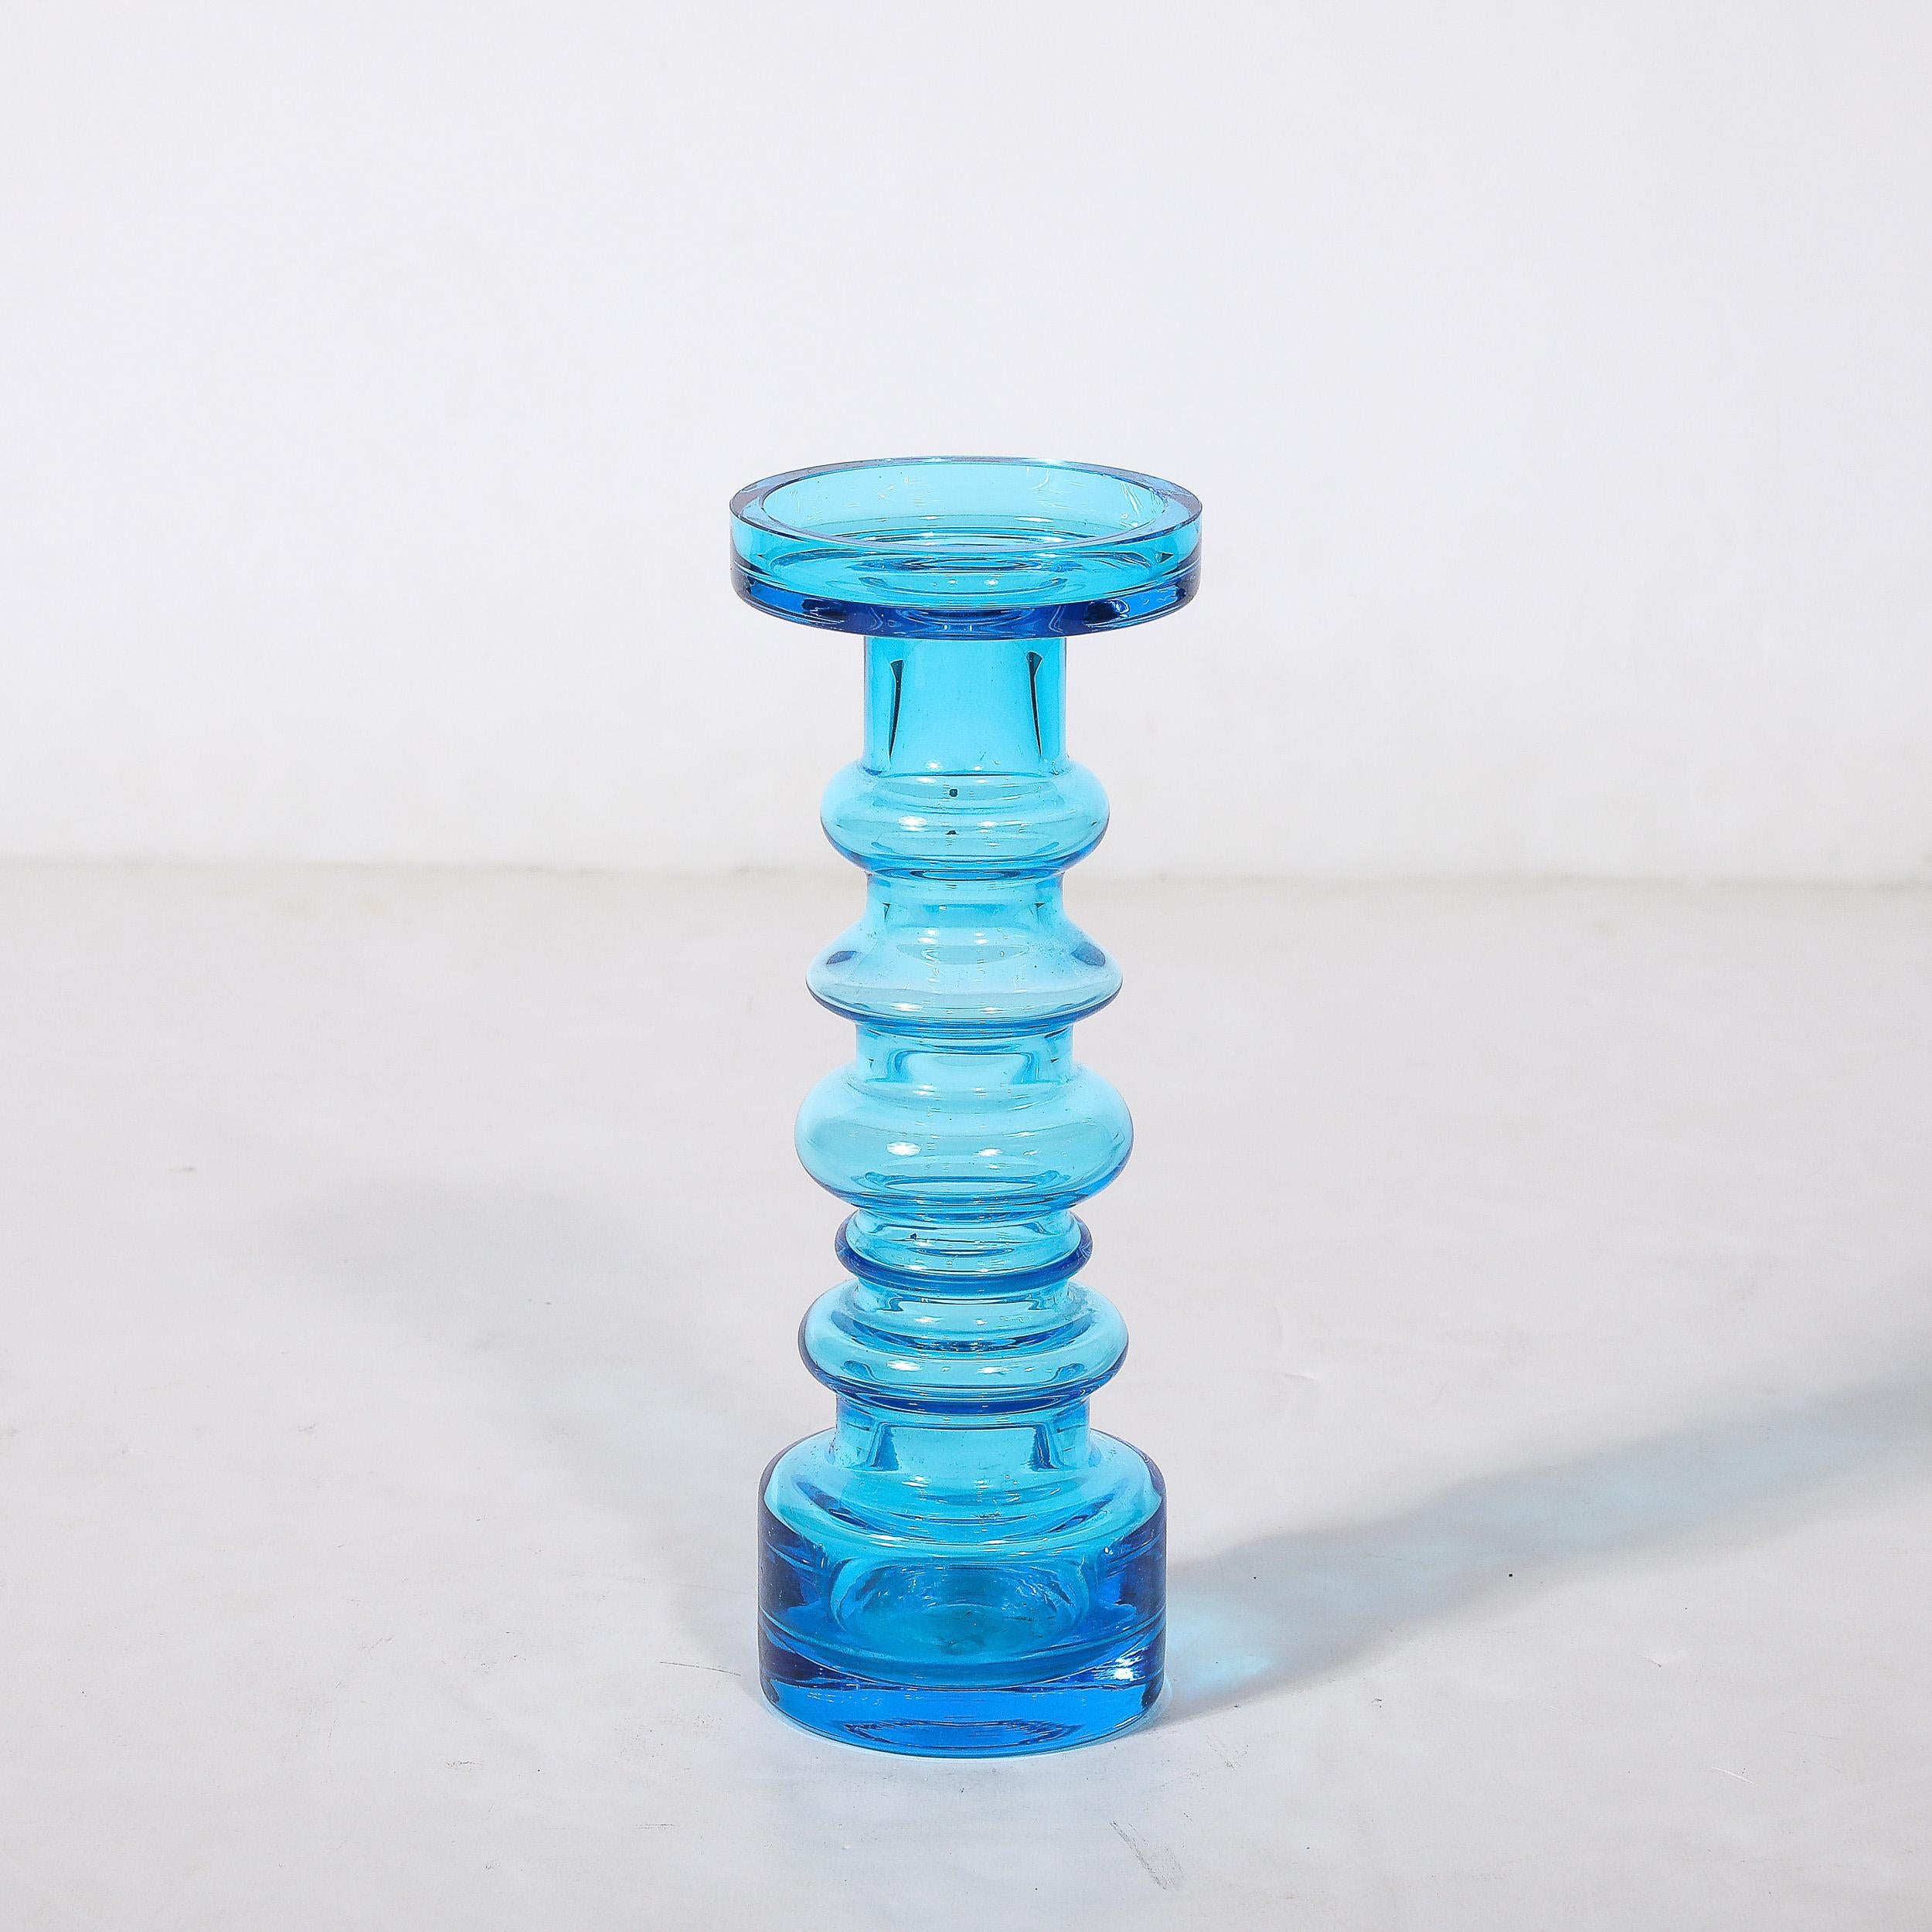 This beautiful Mid-Century Modernist Balustrade Form Hand-Blown Blue Glass Vase is by Oiva Toikka and originates from Finland, Circa 1960. Featuring a balustrade form multi-tiered silhouette in a lovely translucent blue glass. This undulating